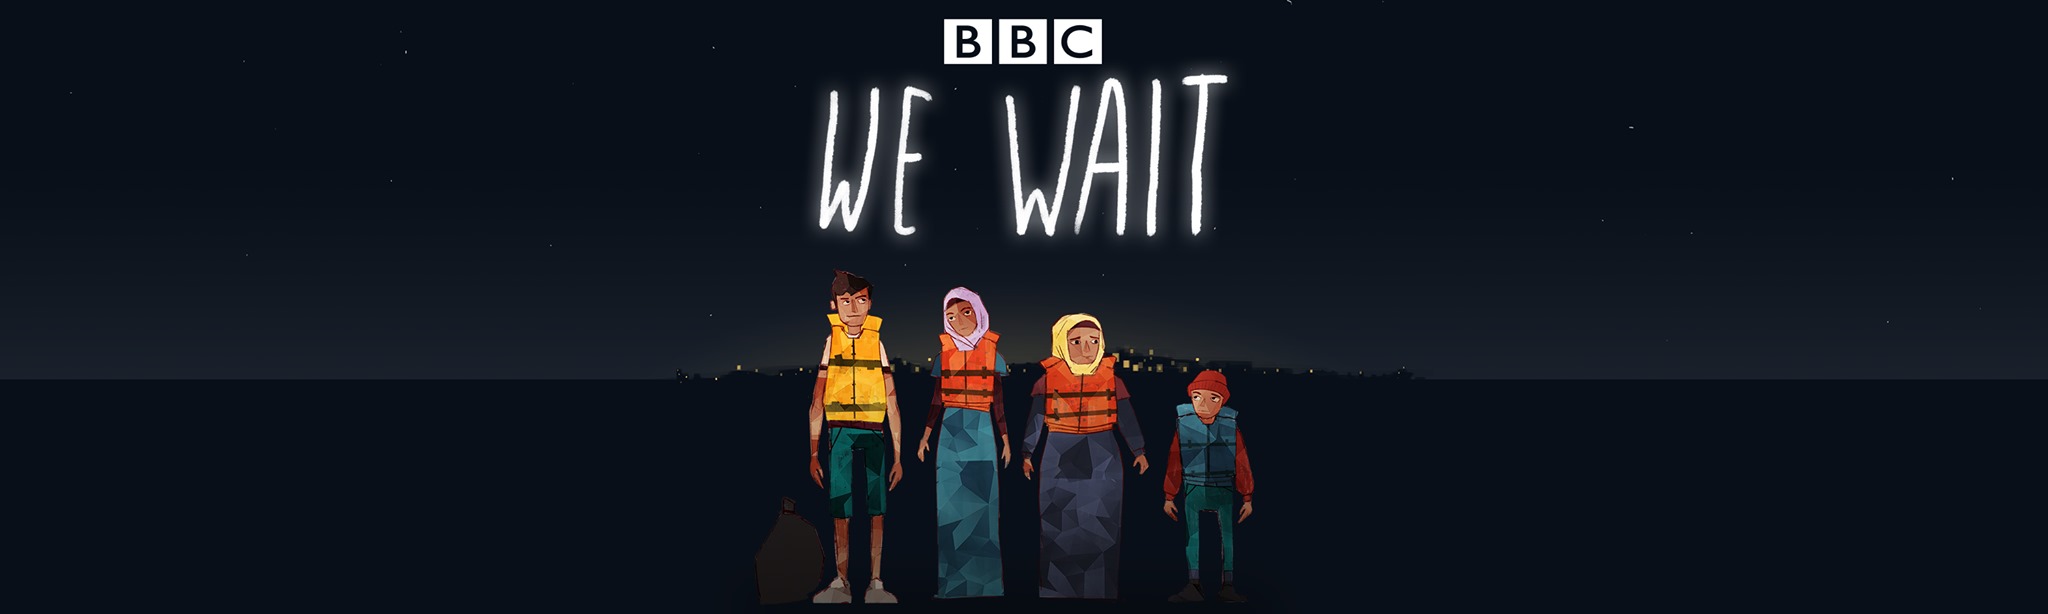 Example of an immersive experience: We Wait, from BBC, a dramatised story transporting users to the heart of the refugee crisis, in Virtual Reality